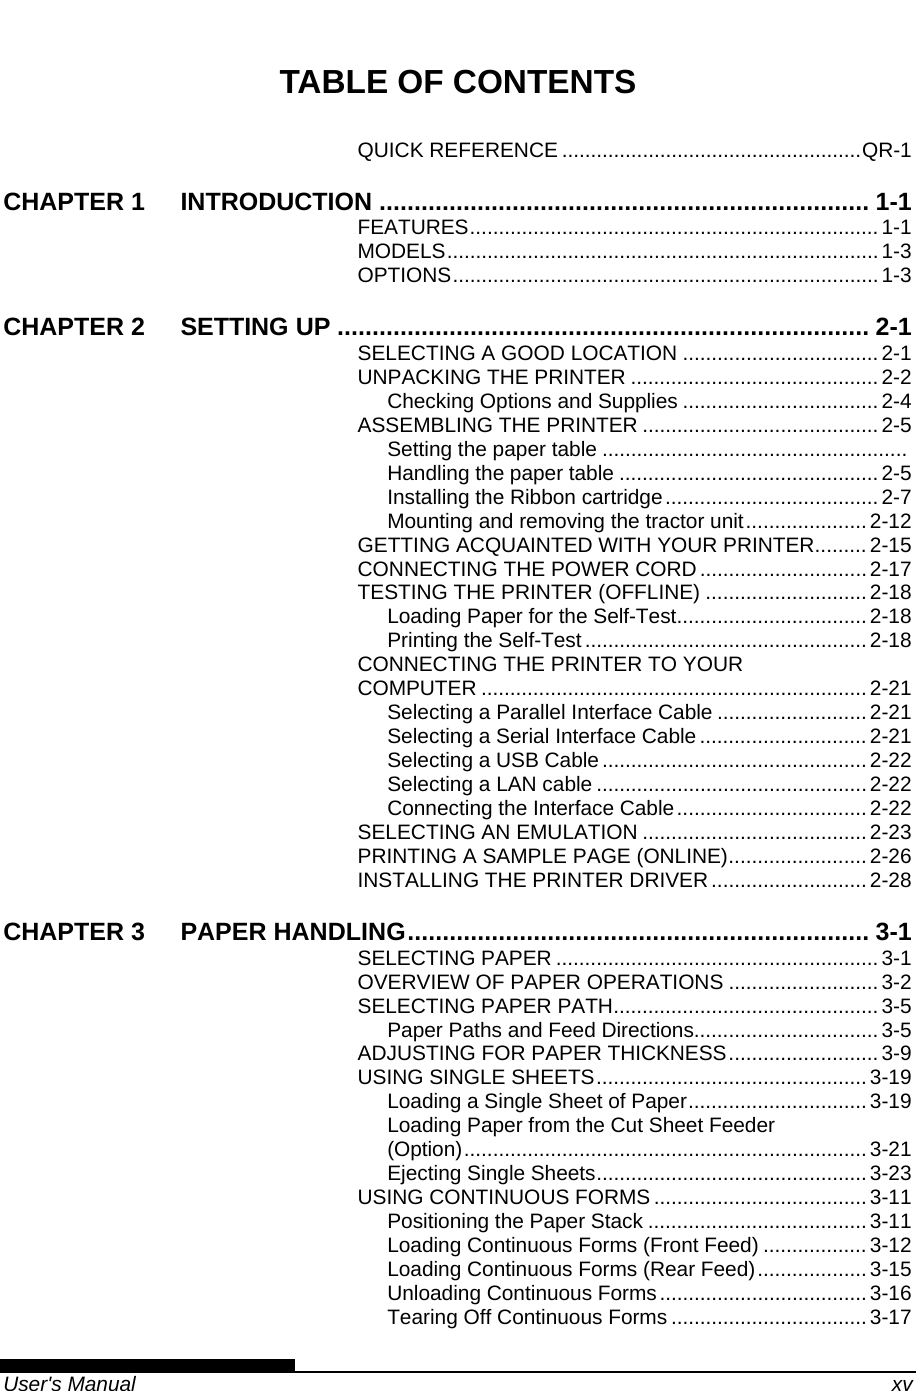   User&apos;s Manual    xv TABLE OF CONTENTS QUICK REFERENCE ....................................................QR-1 CHAPTER 1 INTRODUCTION ...................................................................... 1-1 FEATURES.......................................................................1-1 MODELS...........................................................................1-3 OPTIONS..........................................................................1-3 CHAPTER 2 SETTING UP ............................................................................ 2-1 SELECTING A GOOD LOCATION ..................................2-1 UNPACKING THE PRINTER ...........................................2-2 Checking Options and Supplies ..................................2-4 ASSEMBLING THE PRINTER .........................................2-5 Setting the paper table .....................................................  Handling the paper table ............................................. 2-5 Installing the Ribbon cartridge..................................... 2-7 Mounting and removing the tractor unit.....................2-12 GETTING ACQUAINTED WITH YOUR PRINTER......... 2-15 CONNECTING THE POWER CORD.............................2-17 TESTING THE PRINTER (OFFLINE) ............................2-18 Loading Paper for the Self-Test.................................2-18 Printing the Self-Test ................................................. 2-18 CONNECTING THE PRINTER TO YOUR COMPUTER ...................................................................2-21 Selecting a Parallel Interface Cable ..........................2-21 Selecting a Serial Interface Cable ............................. 2-21 Selecting a USB Cable..............................................2-22 Selecting a LAN cable ............................................... 2-22 Connecting the Interface Cable.................................2-22 SELECTING AN EMULATION .......................................2-23 PRINTING A SAMPLE PAGE (ONLINE)........................ 2-26 INSTALLING THE PRINTER DRIVER...........................2-28 CHAPTER 3 PAPER HANDLING.................................................................. 3-1 SELECTING PAPER ........................................................ 3-1 OVERVIEW OF PAPER OPERATIONS ..........................3-2 SELECTING PAPER PATH.............................................. 3-5 Paper Paths and Feed Directions................................3-5 ADJUSTING FOR PAPER THICKNESS..........................3-9 USING SINGLE SHEETS............................................... 3-19 Loading a Single Sheet of Paper............................... 3-19 Loading Paper from the Cut Sheet Feeder (Option)......................................................................3-21 Ejecting Single Sheets...............................................3-23 USING CONTINUOUS FORMS .....................................3-11 Positioning the Paper Stack ...................................... 3-11 Loading Continuous Forms (Front Feed) ..................3-12 Loading Continuous Forms (Rear Feed)................... 3-15 Unloading Continuous Forms....................................3-16 Tearing Off Continuous Forms ..................................3-17 